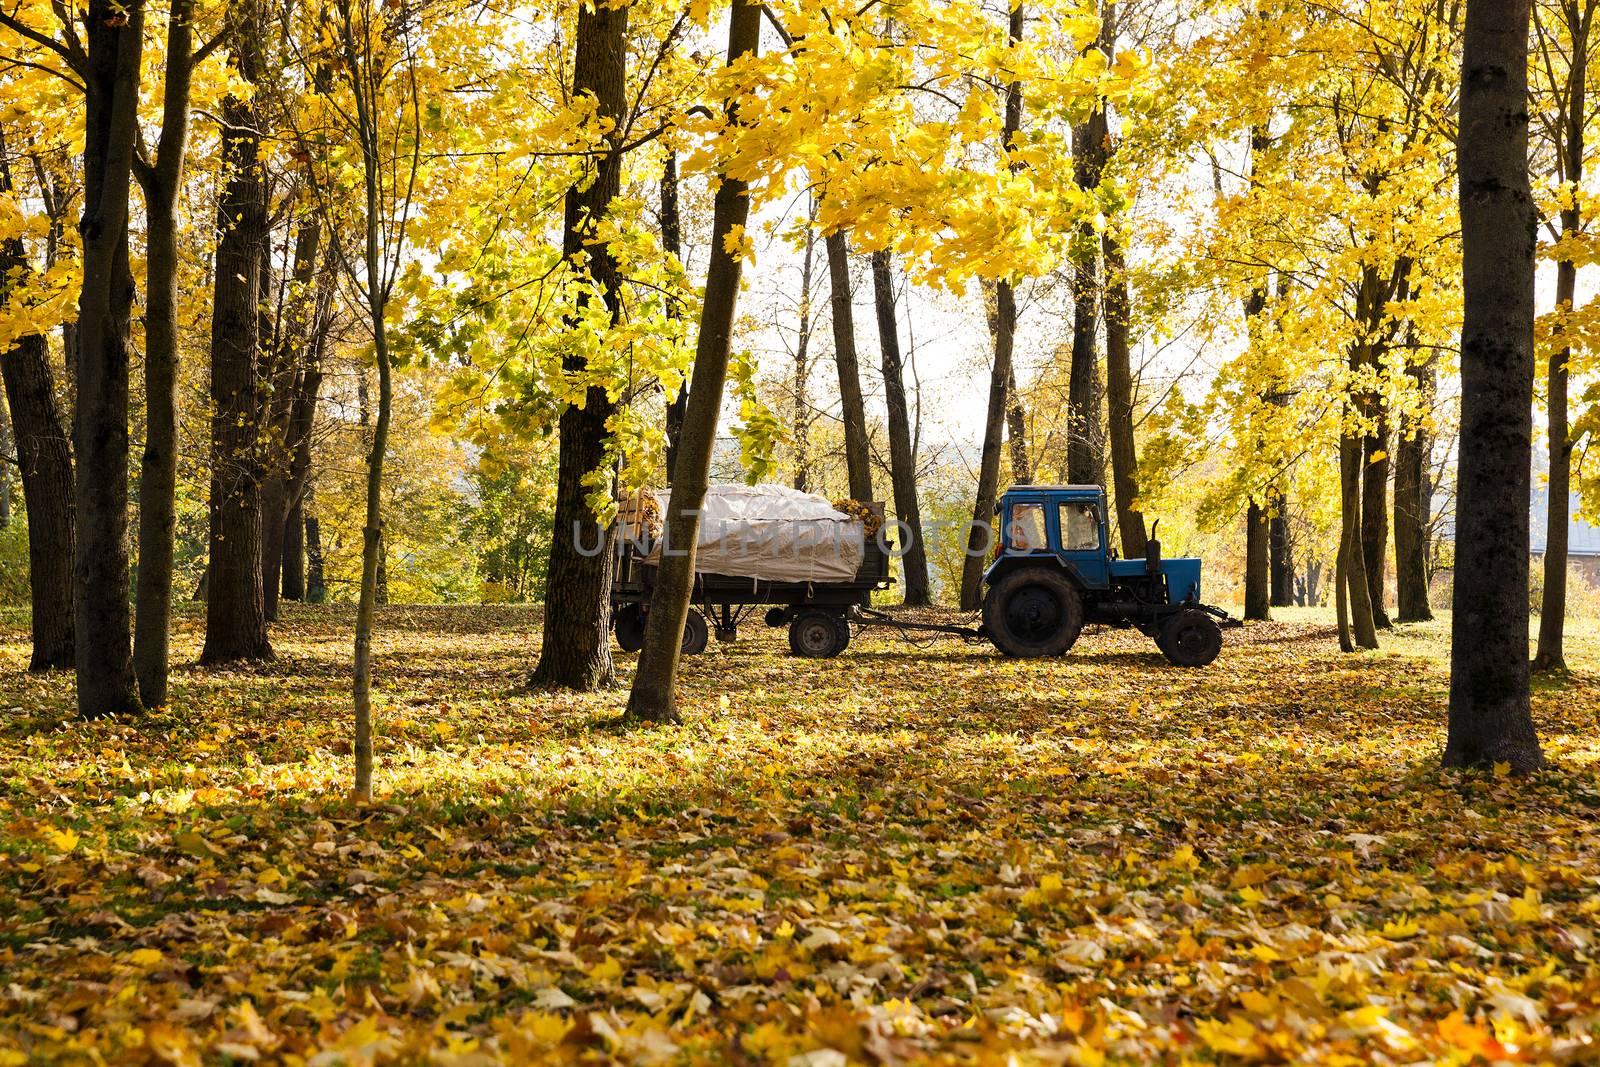  cleaning in the fallen-down fall of foliage.  foliage is loaded into a tractor